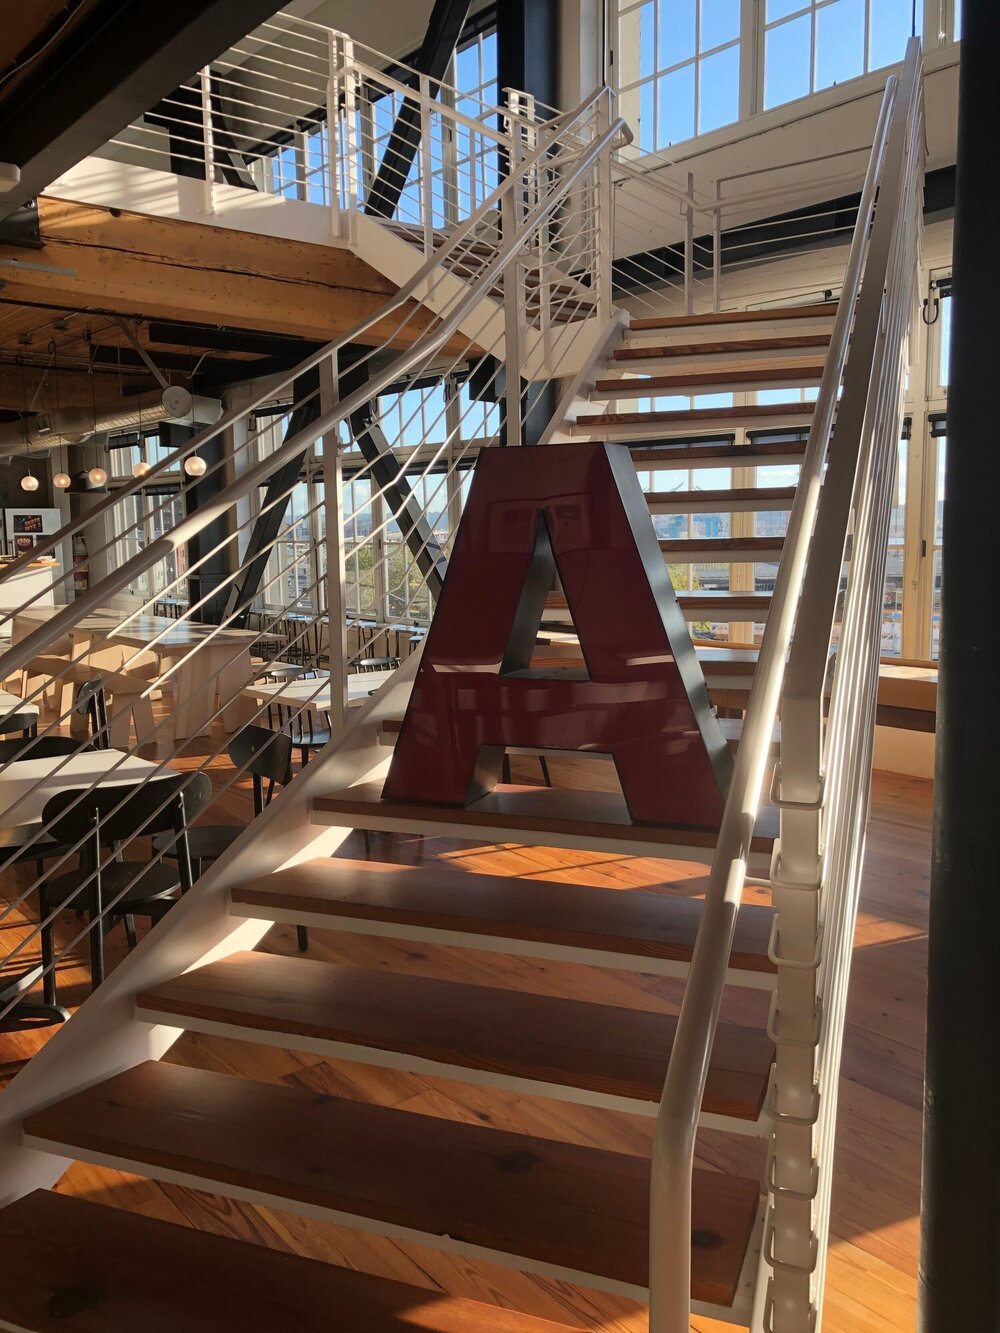  Image from the event space, depicting a capital “A” on the staircase to the 2nd level of Artefact. 